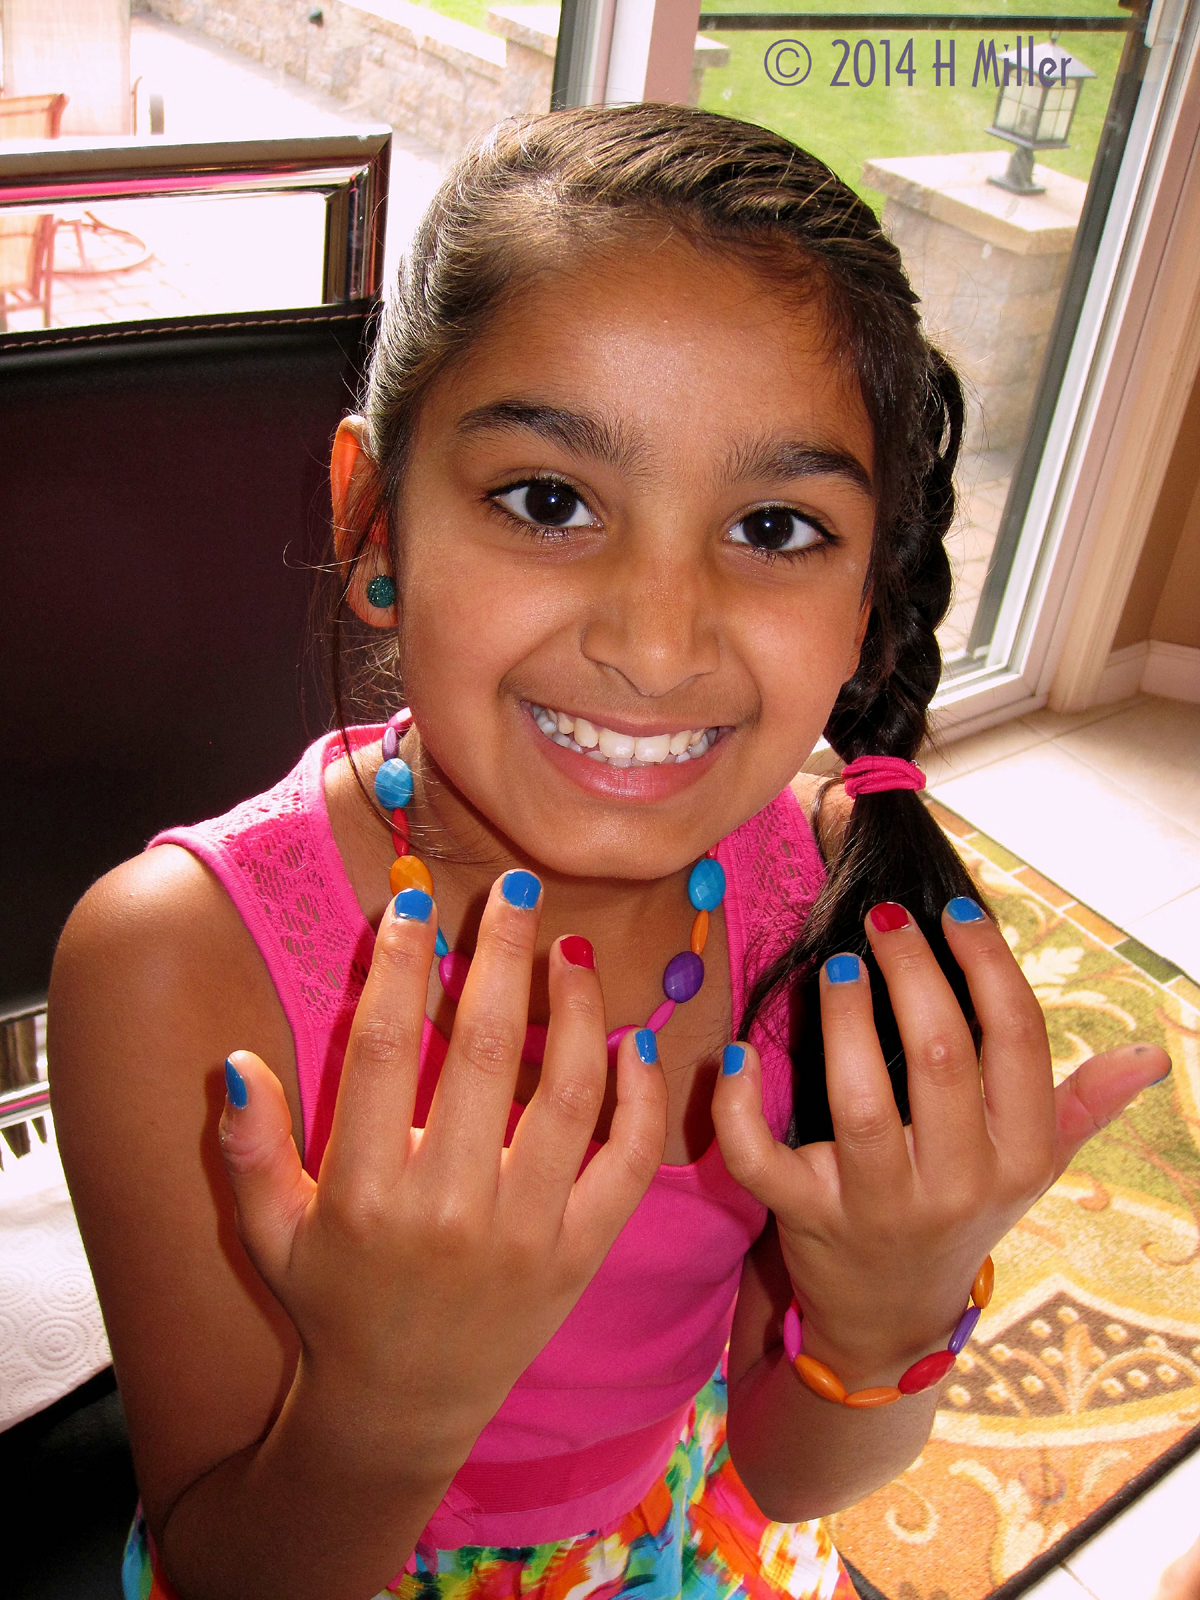 Kids Spa Mini Mani Nails Match Her Jewelry And0Outfit! Nice! 